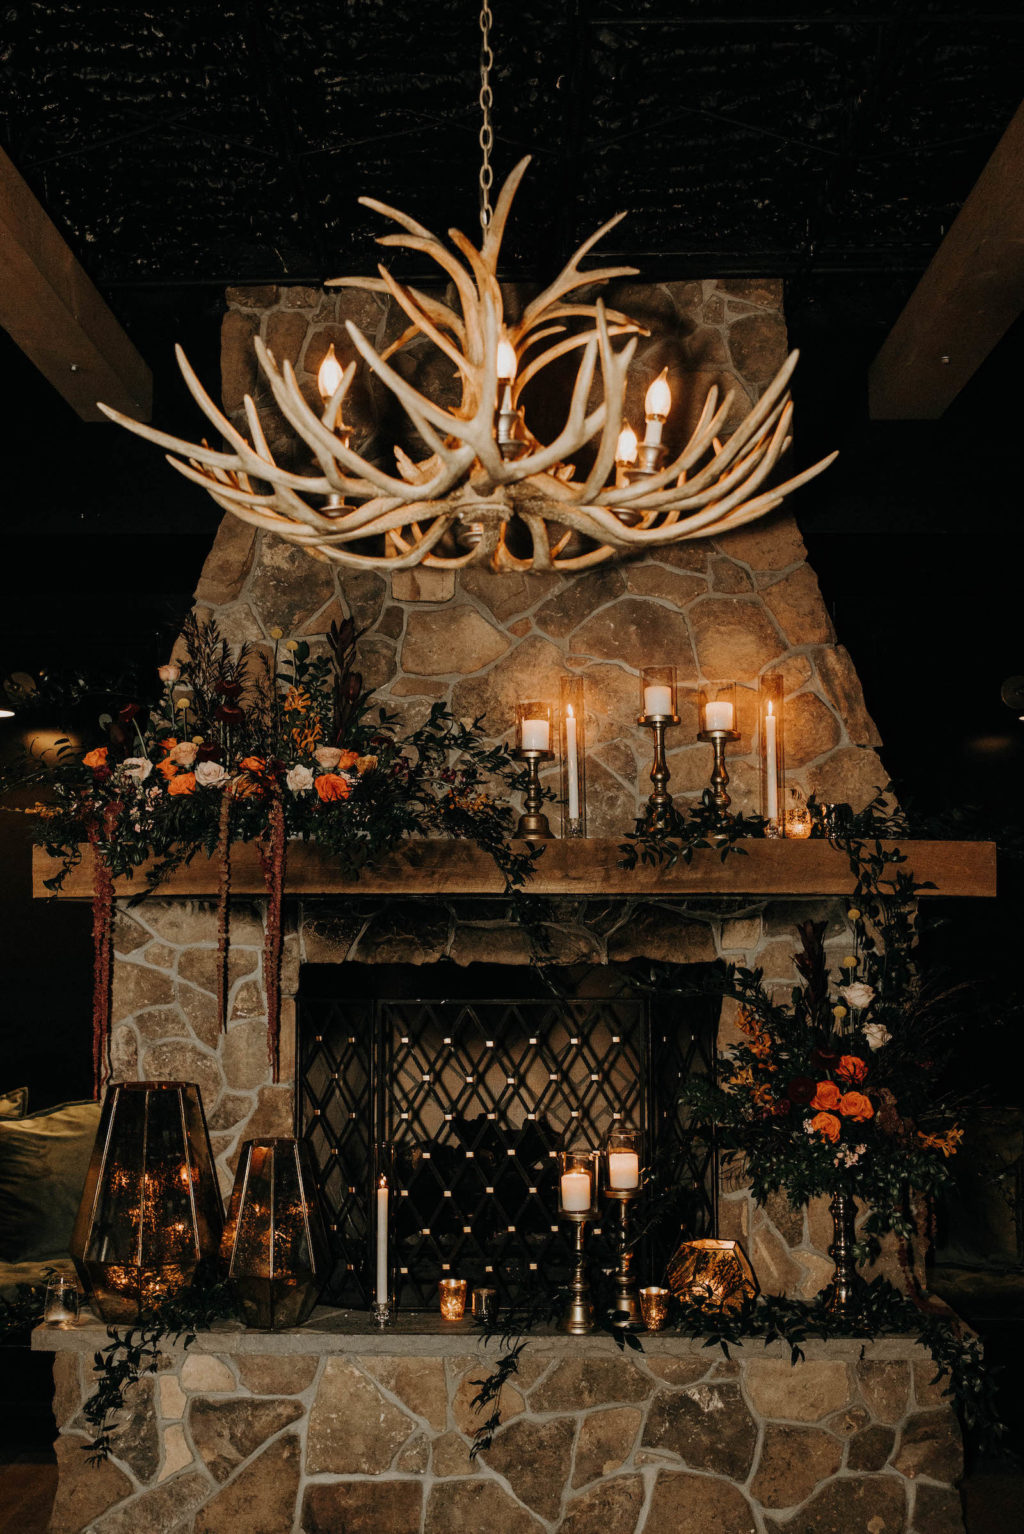 Dark and Moody Wedding Ceremony Decor, Deer Antler Chandelier, Stone Fireplace and Wooden Mantlepiece with Lush Greenery Leaves, Burnt Orang and Blush Pink Roses, Burgundy Hanging Amaranthus, Gold Geometric Speckled Mercury Vases, Candlesticks | Wedding Venue Urban Stillhouse St. Pete